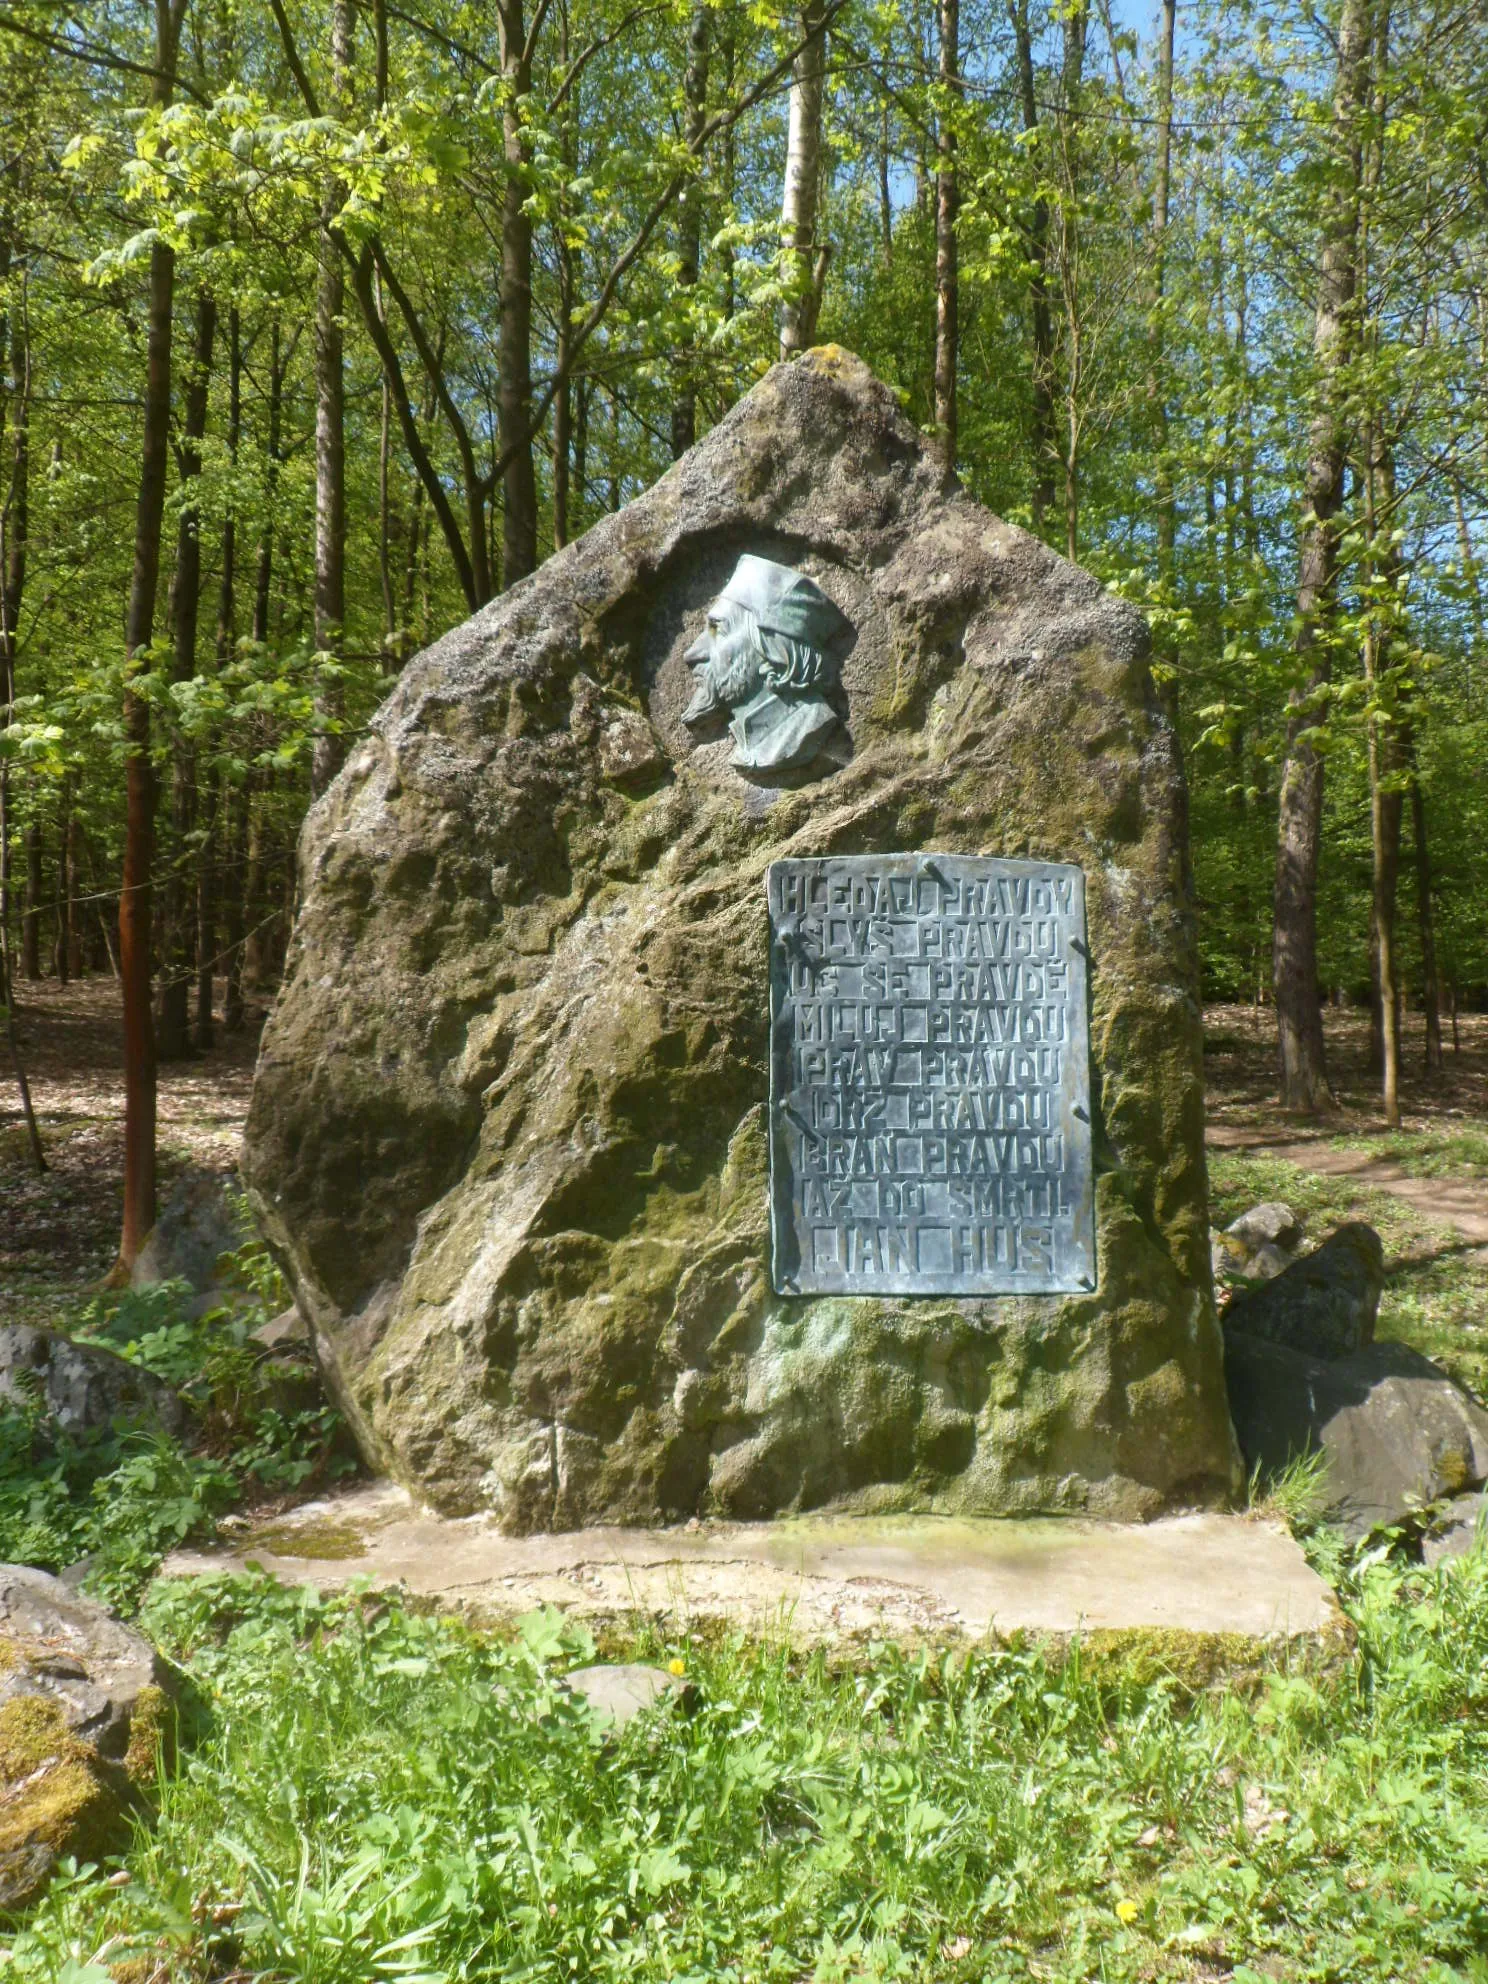 Photo showing: 1921 - Vojtěch Eduard Šaff created the bronze relief of Jan Hus. It was placed on a granite boulder that was brought in 1921 from Oldřiš to Polička and built in a city park Liboháj.